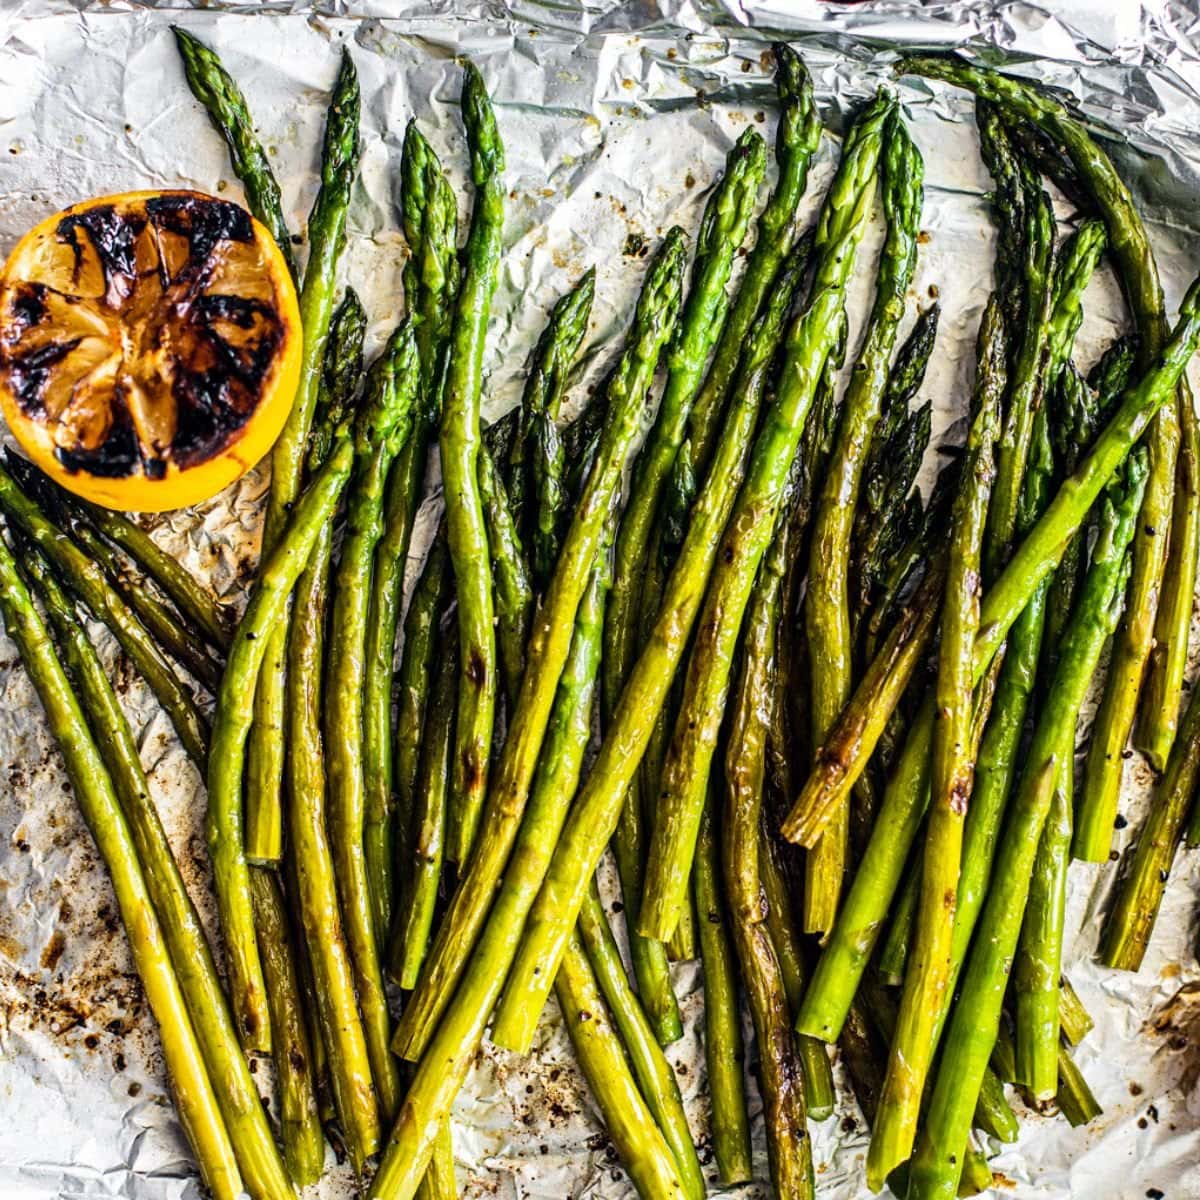 Grilled asparagus with a charred lemon half sitting on a sheet of foil.